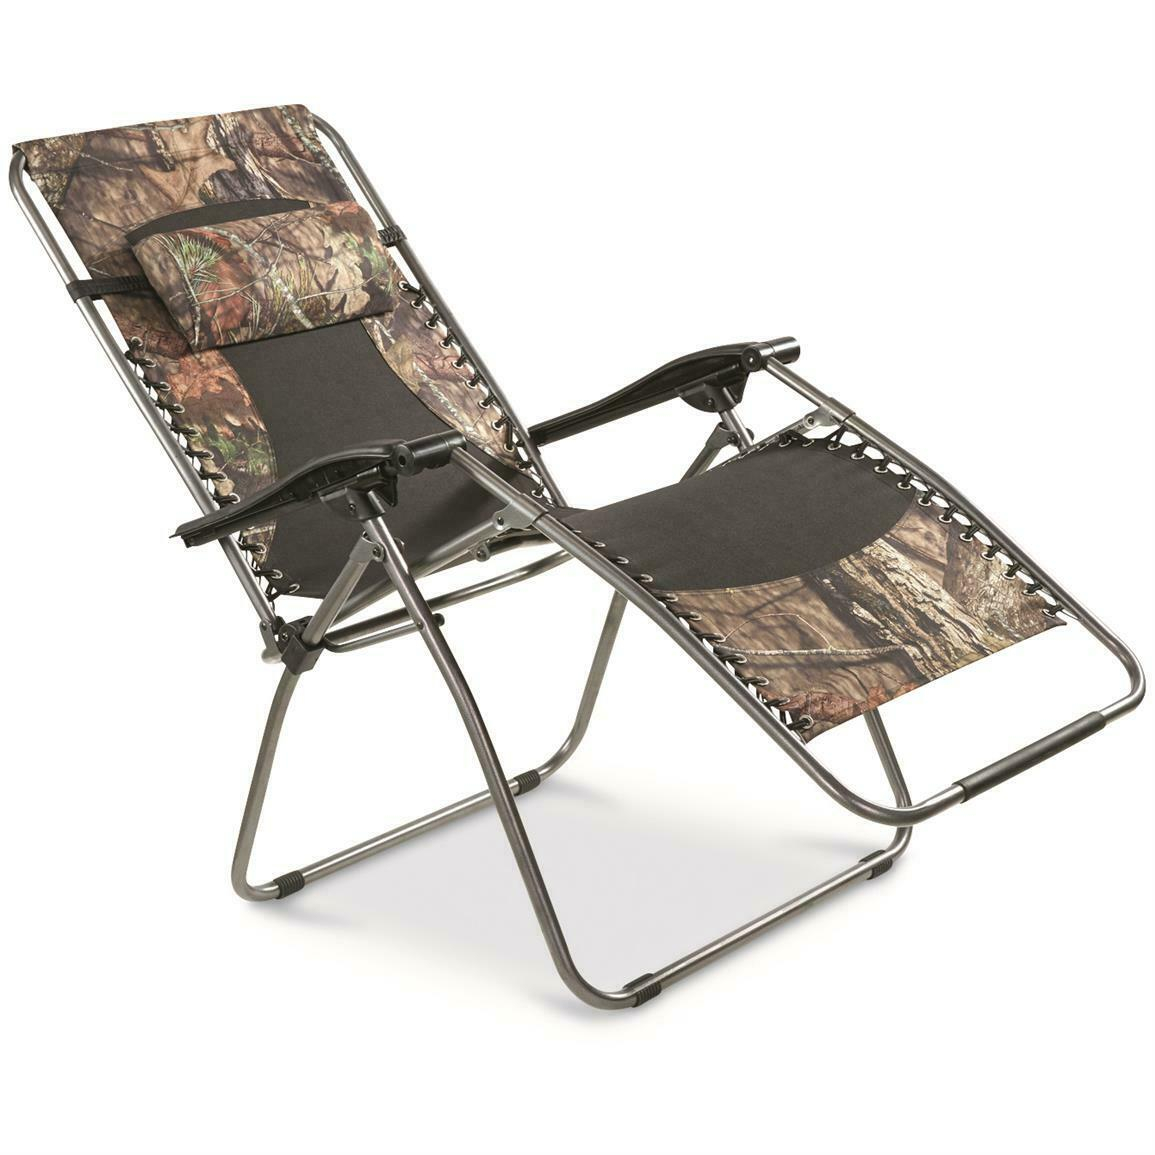 Zero Gravity Chair Oversized Mossy Oak Country Camo 500 Lb Capacity Durable New pertaining to sizing 1155 X 1155